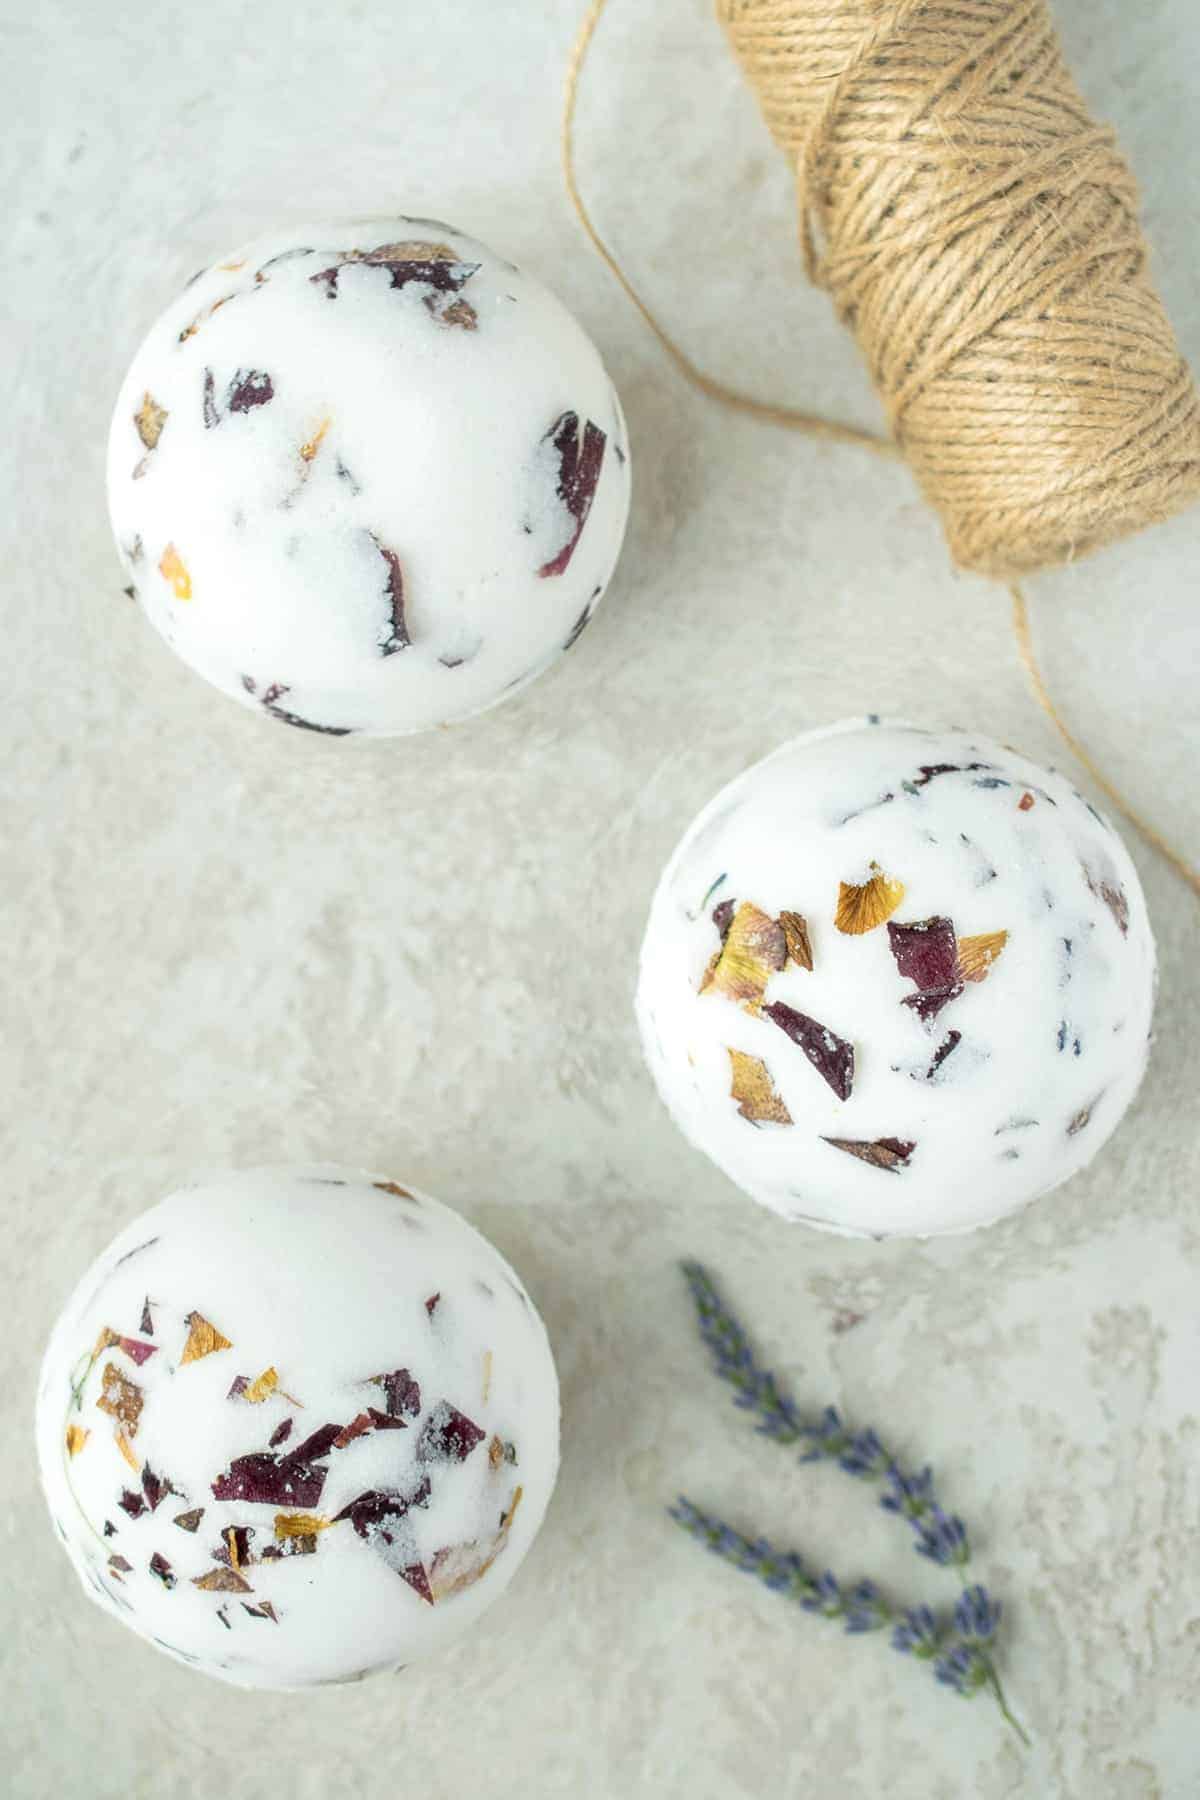 Homemade Bath bombs with rose petals and lavender inside.